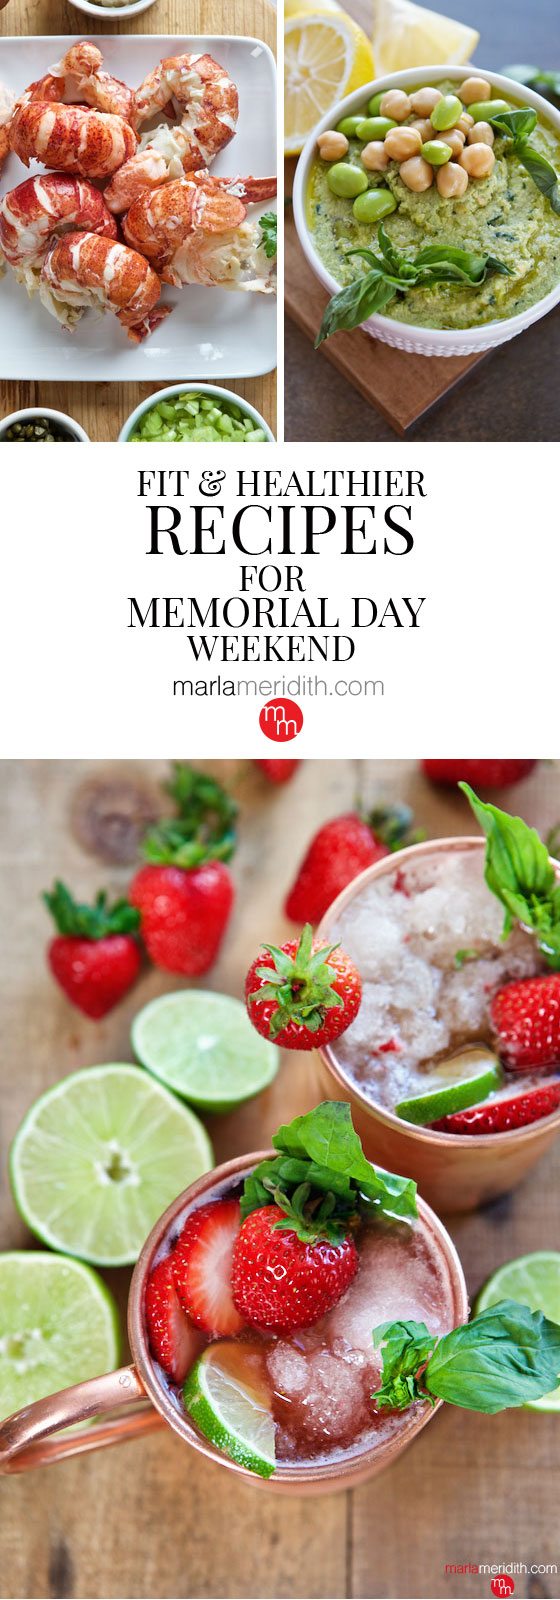 Fit & Healthier Recipes for Memorial Day Weekend! Marla Meridith